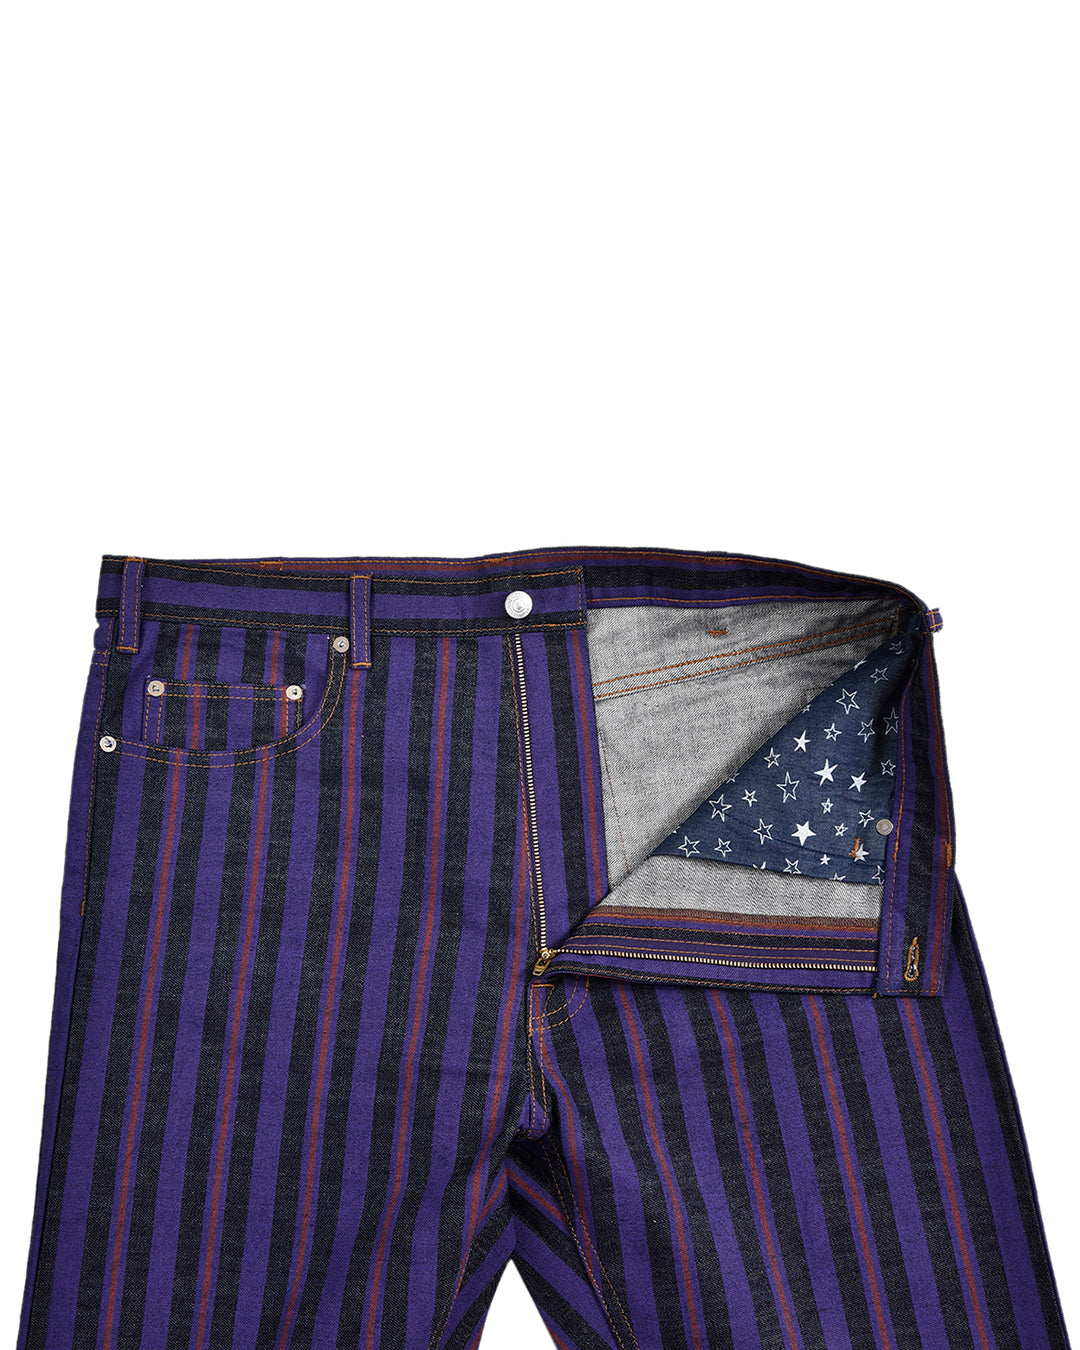 Front open view of custom denim jeans for men by Luxire with purple stripes